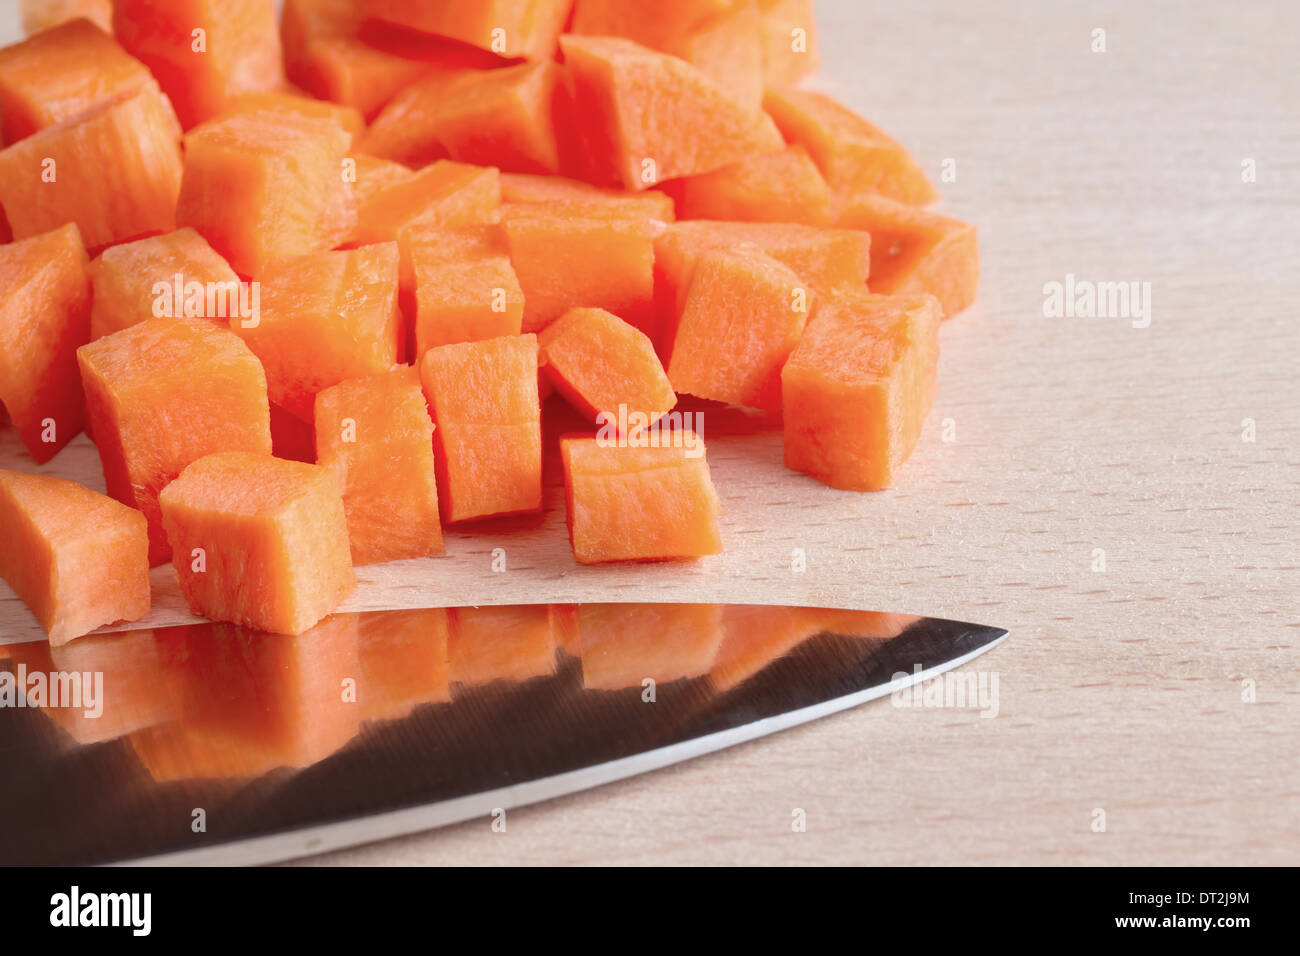 Diced raw carrots with knife on a chopping board Stock Photo